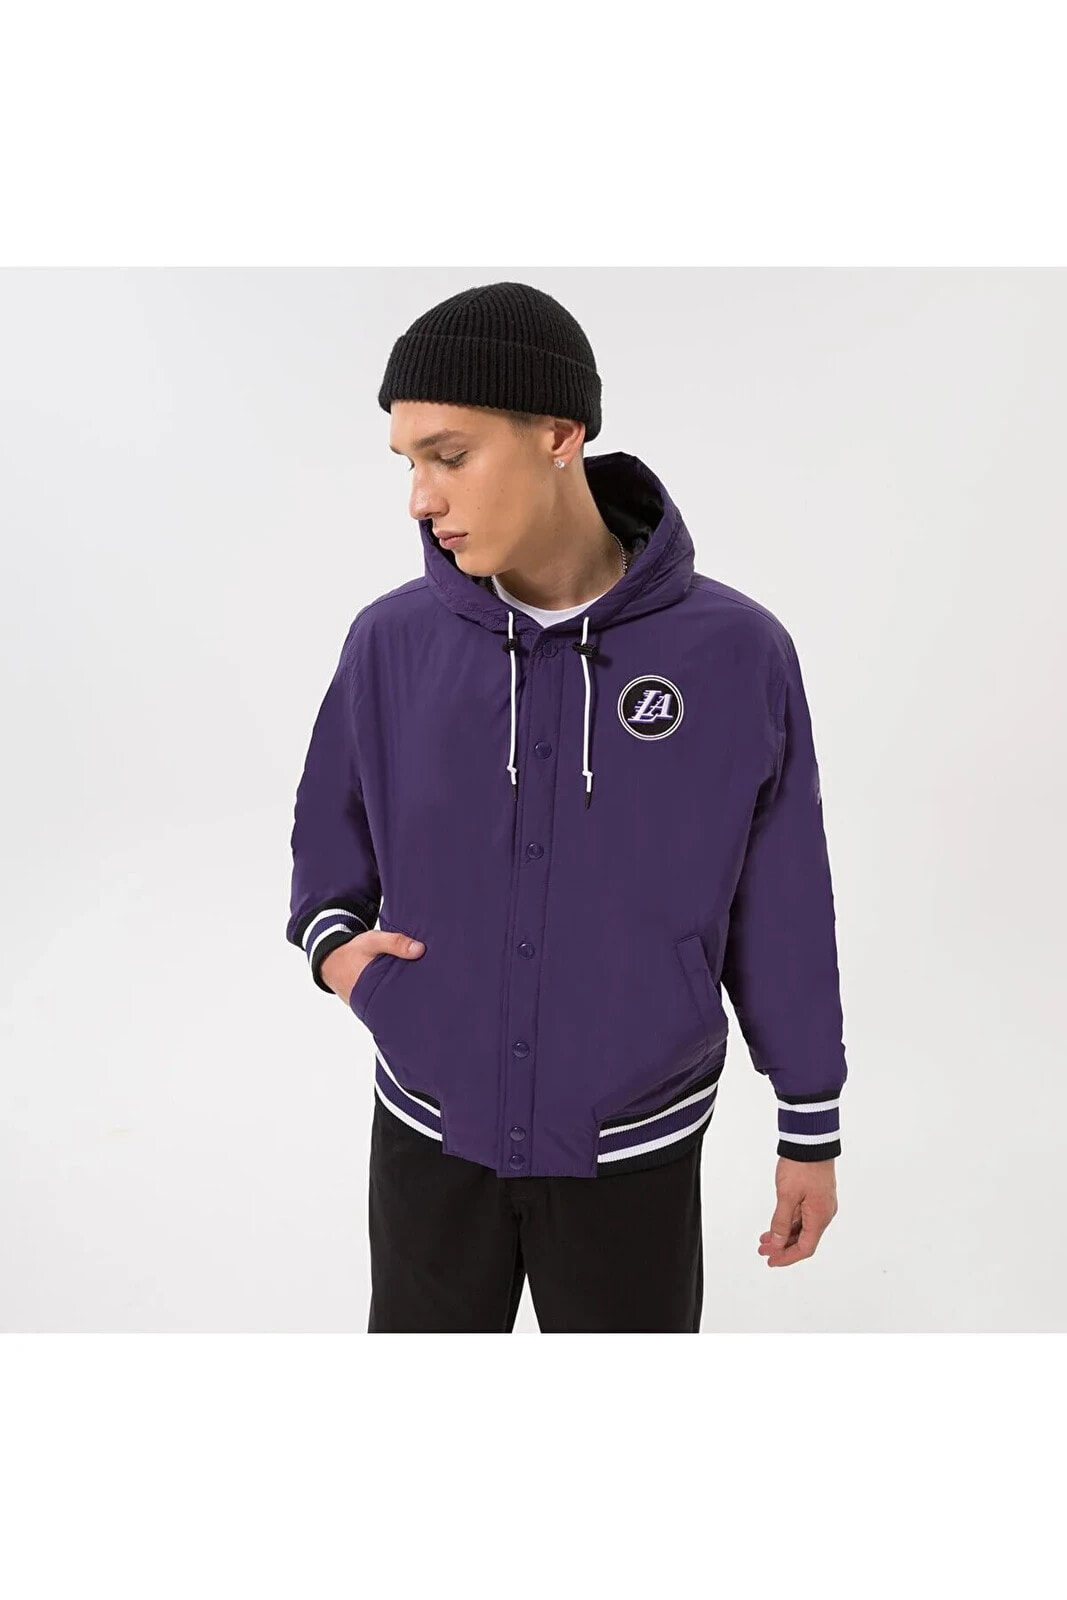 Los Angeles Lakers Courtside Jacket DN4721-535